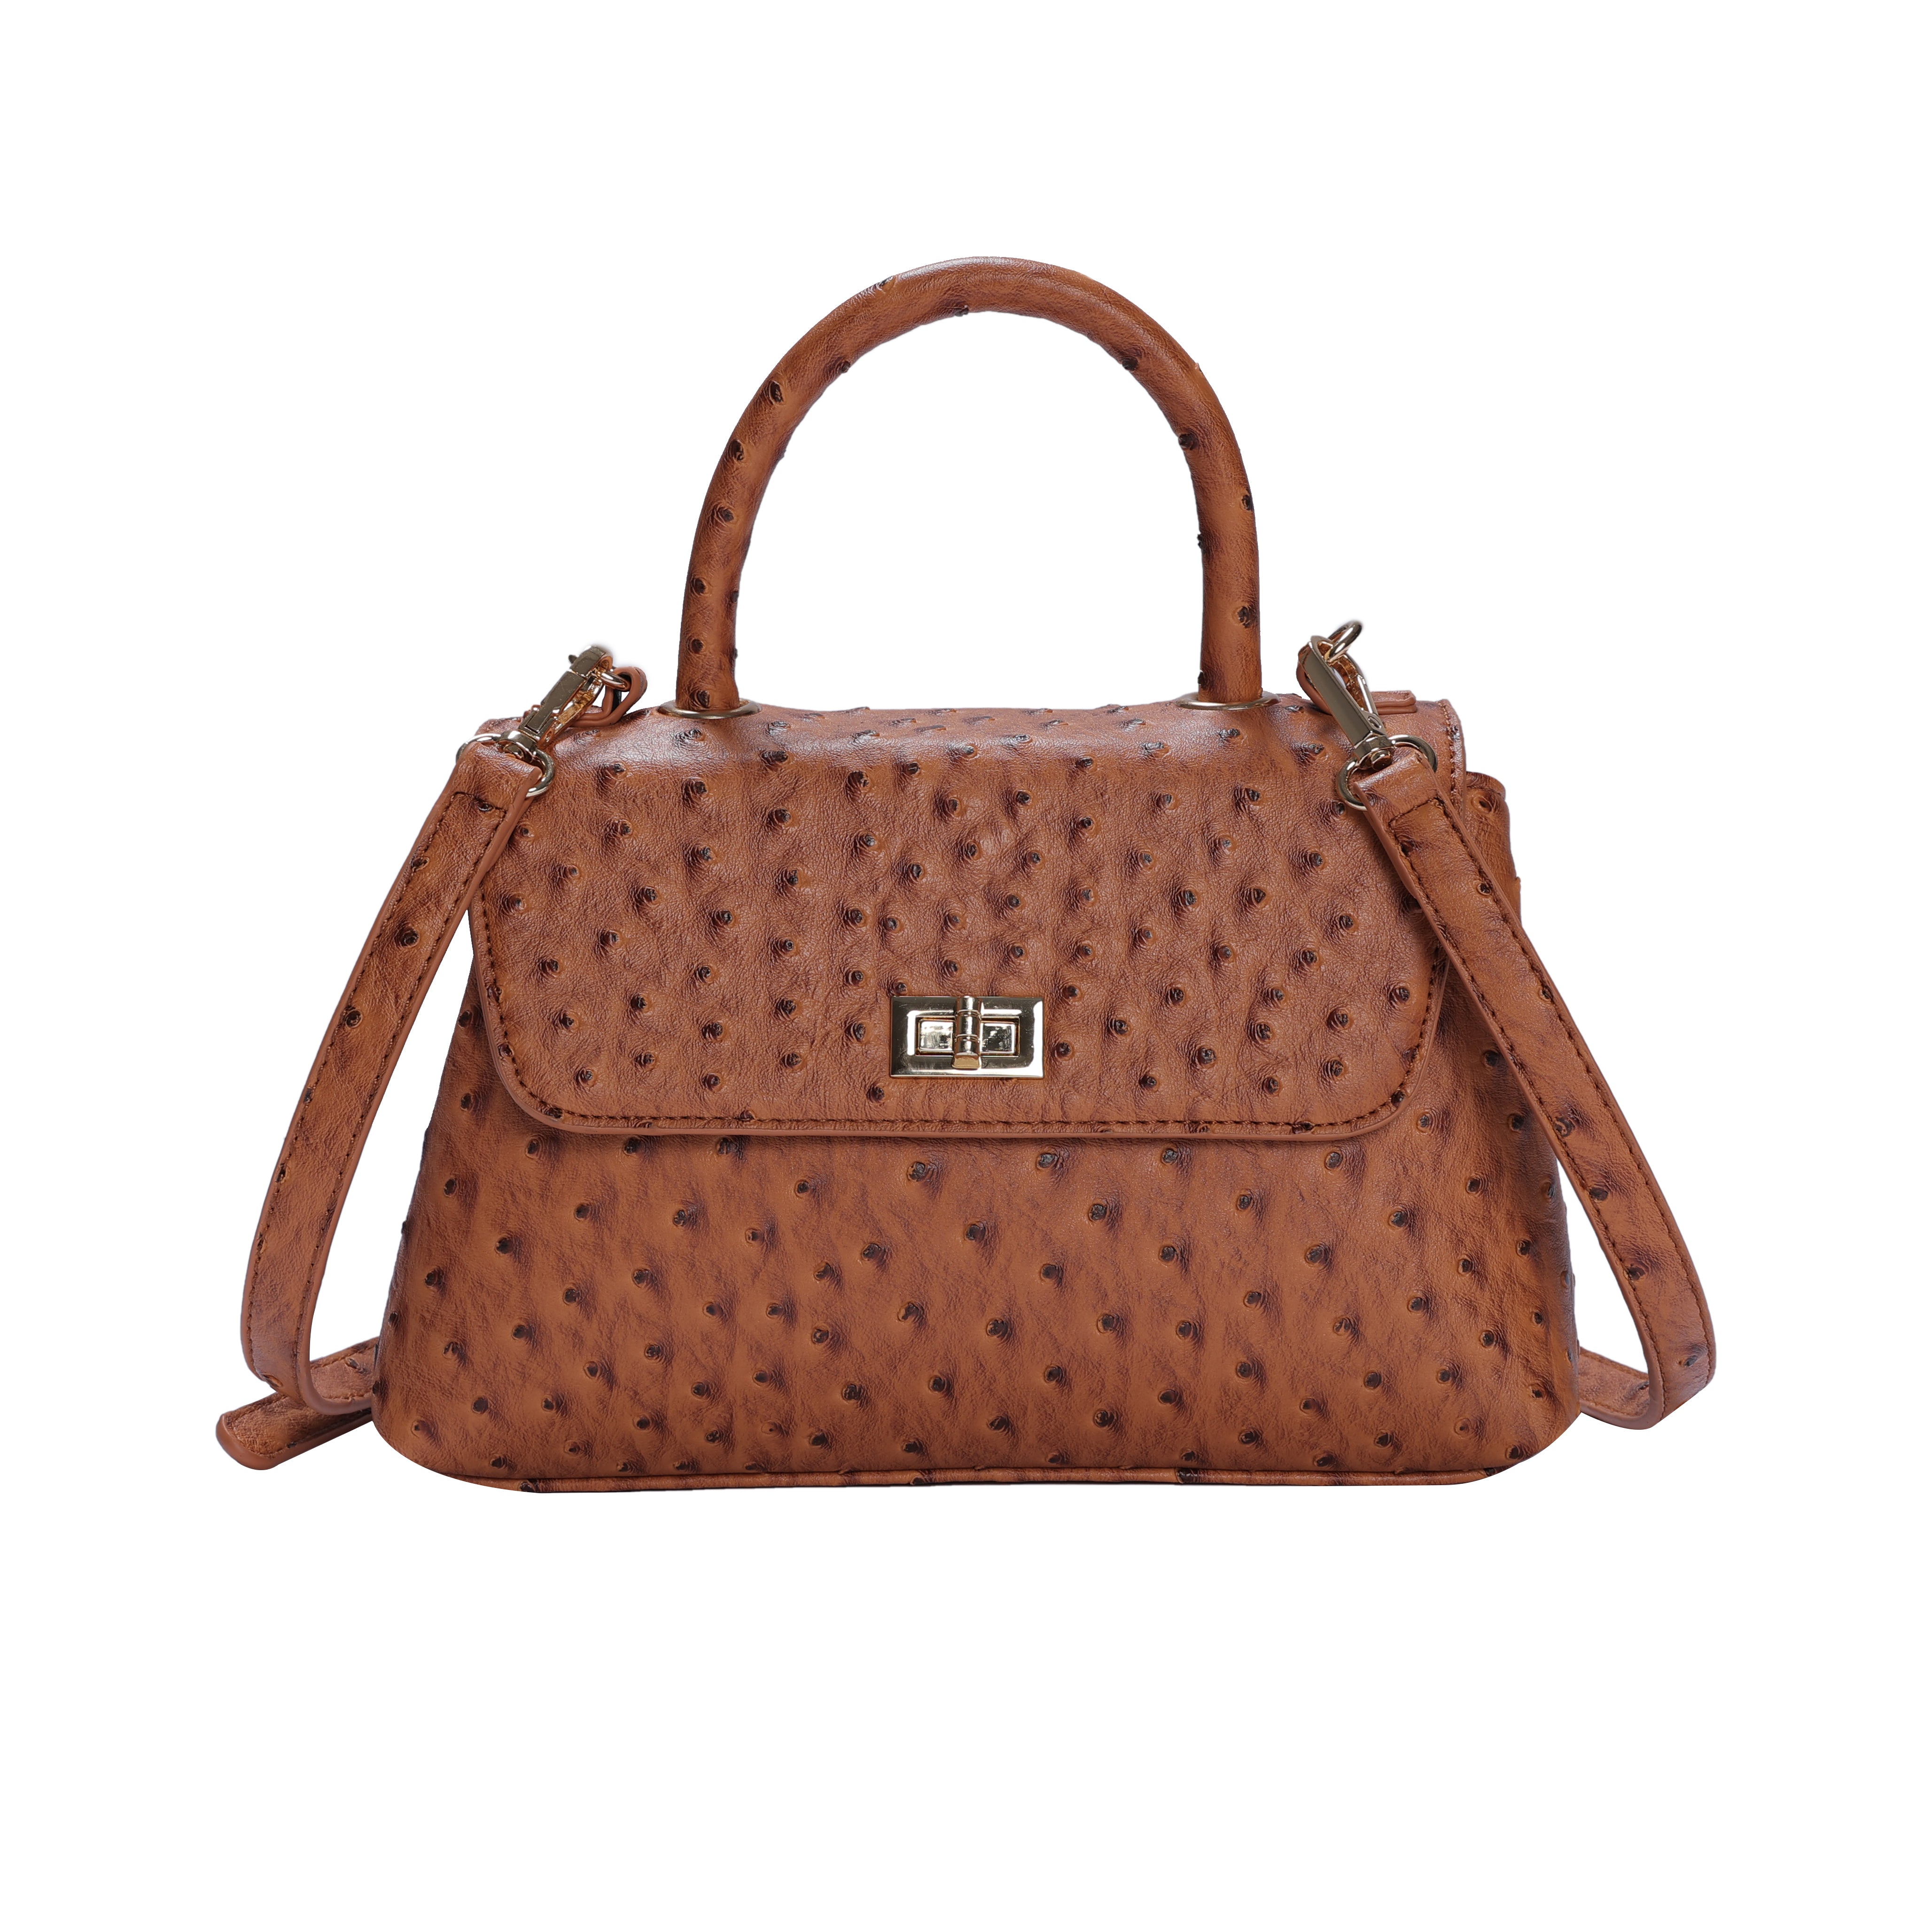 Classic Flap Bag with Handle in Brown